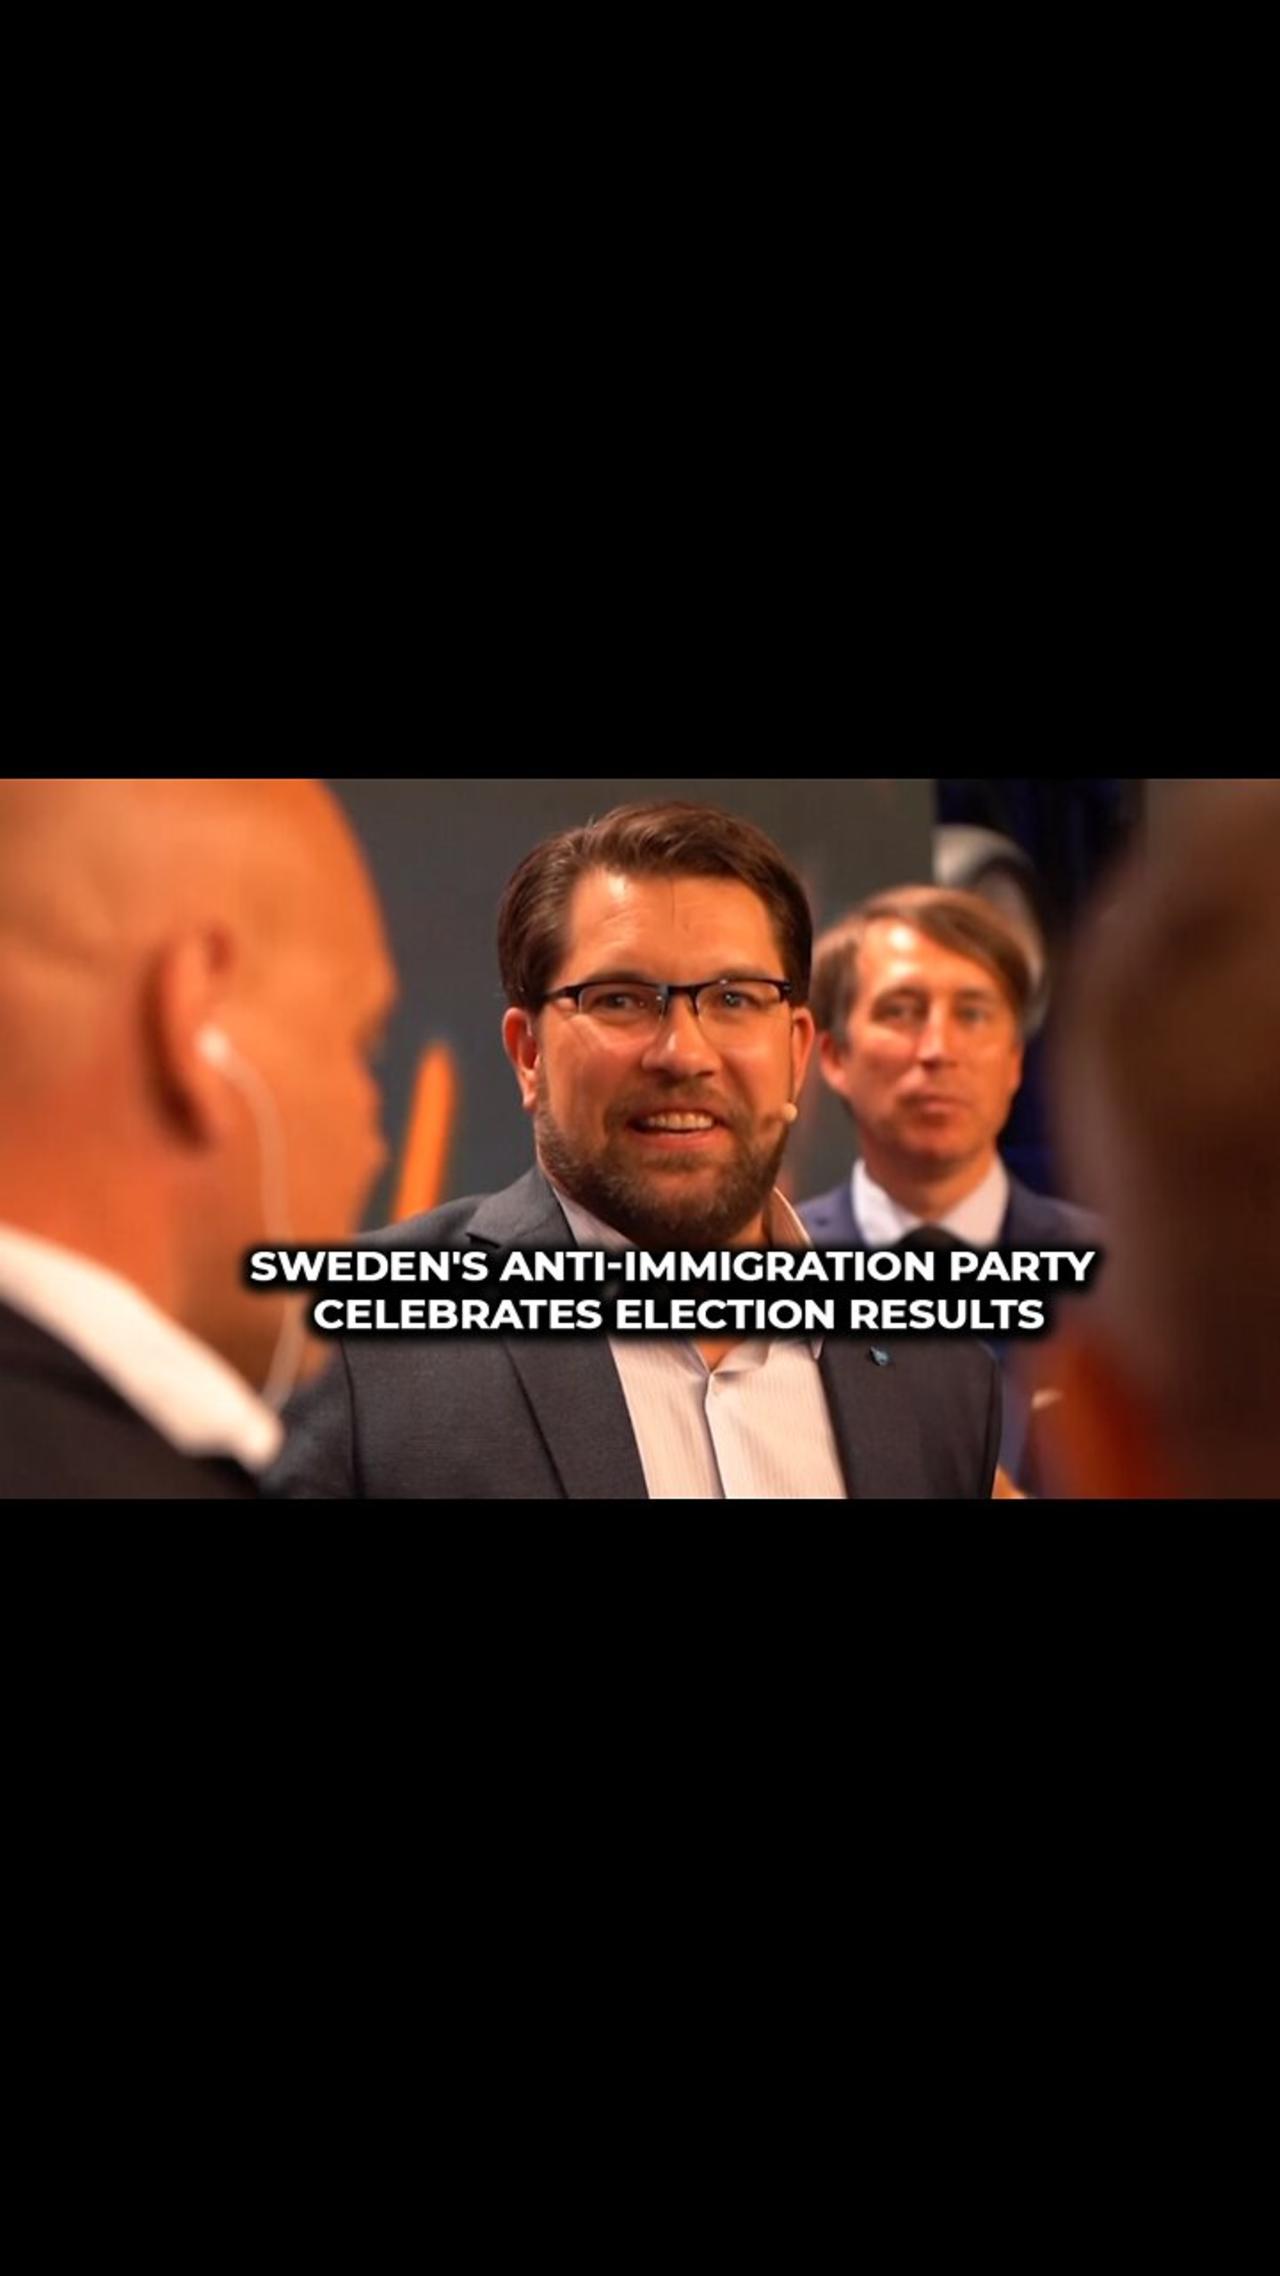 Sweden's anti-immigration party celebrates election results